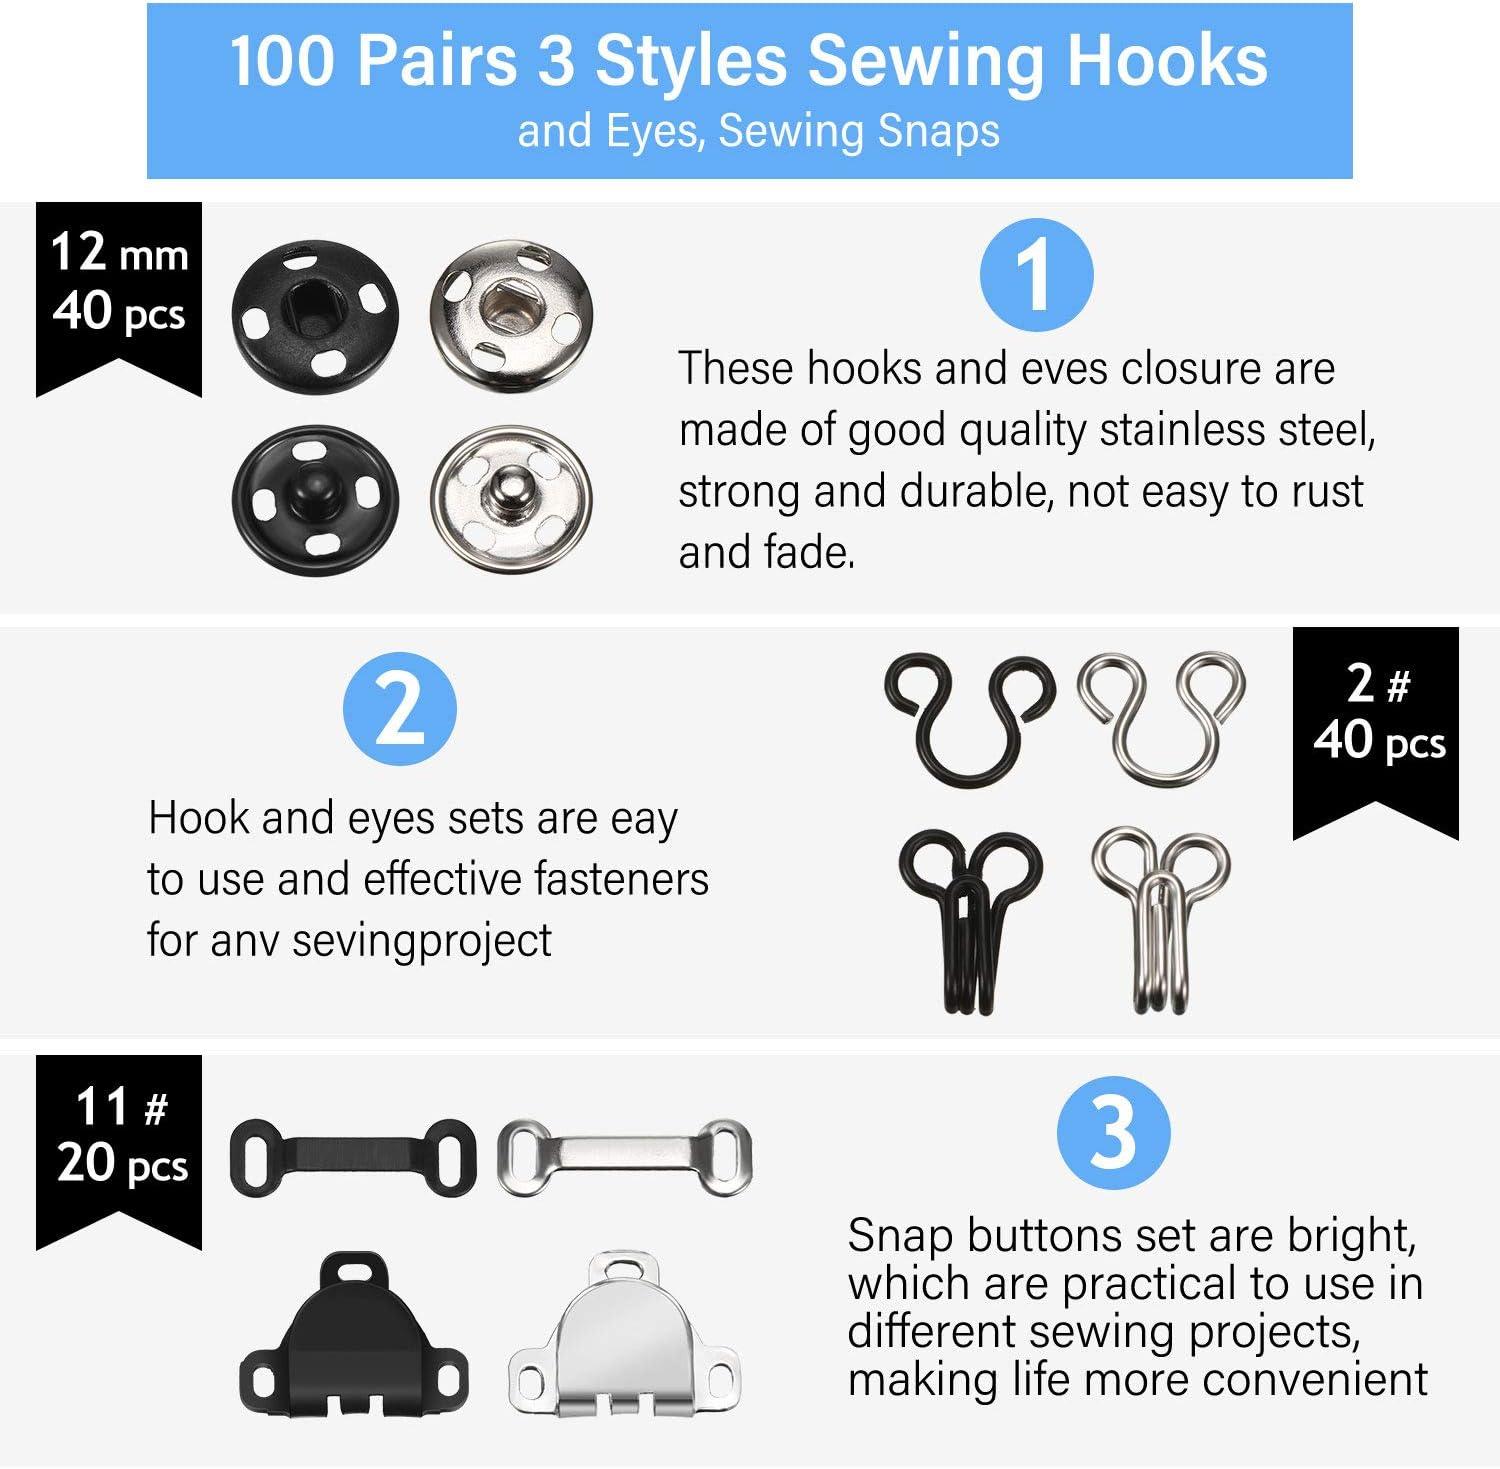 Sewing Hooks And Eyes Set,sew-on Snap Buttons, Diy Clothing Buttons,3  Styles Hook And Eye Closures Sewing Snaps Kit -z